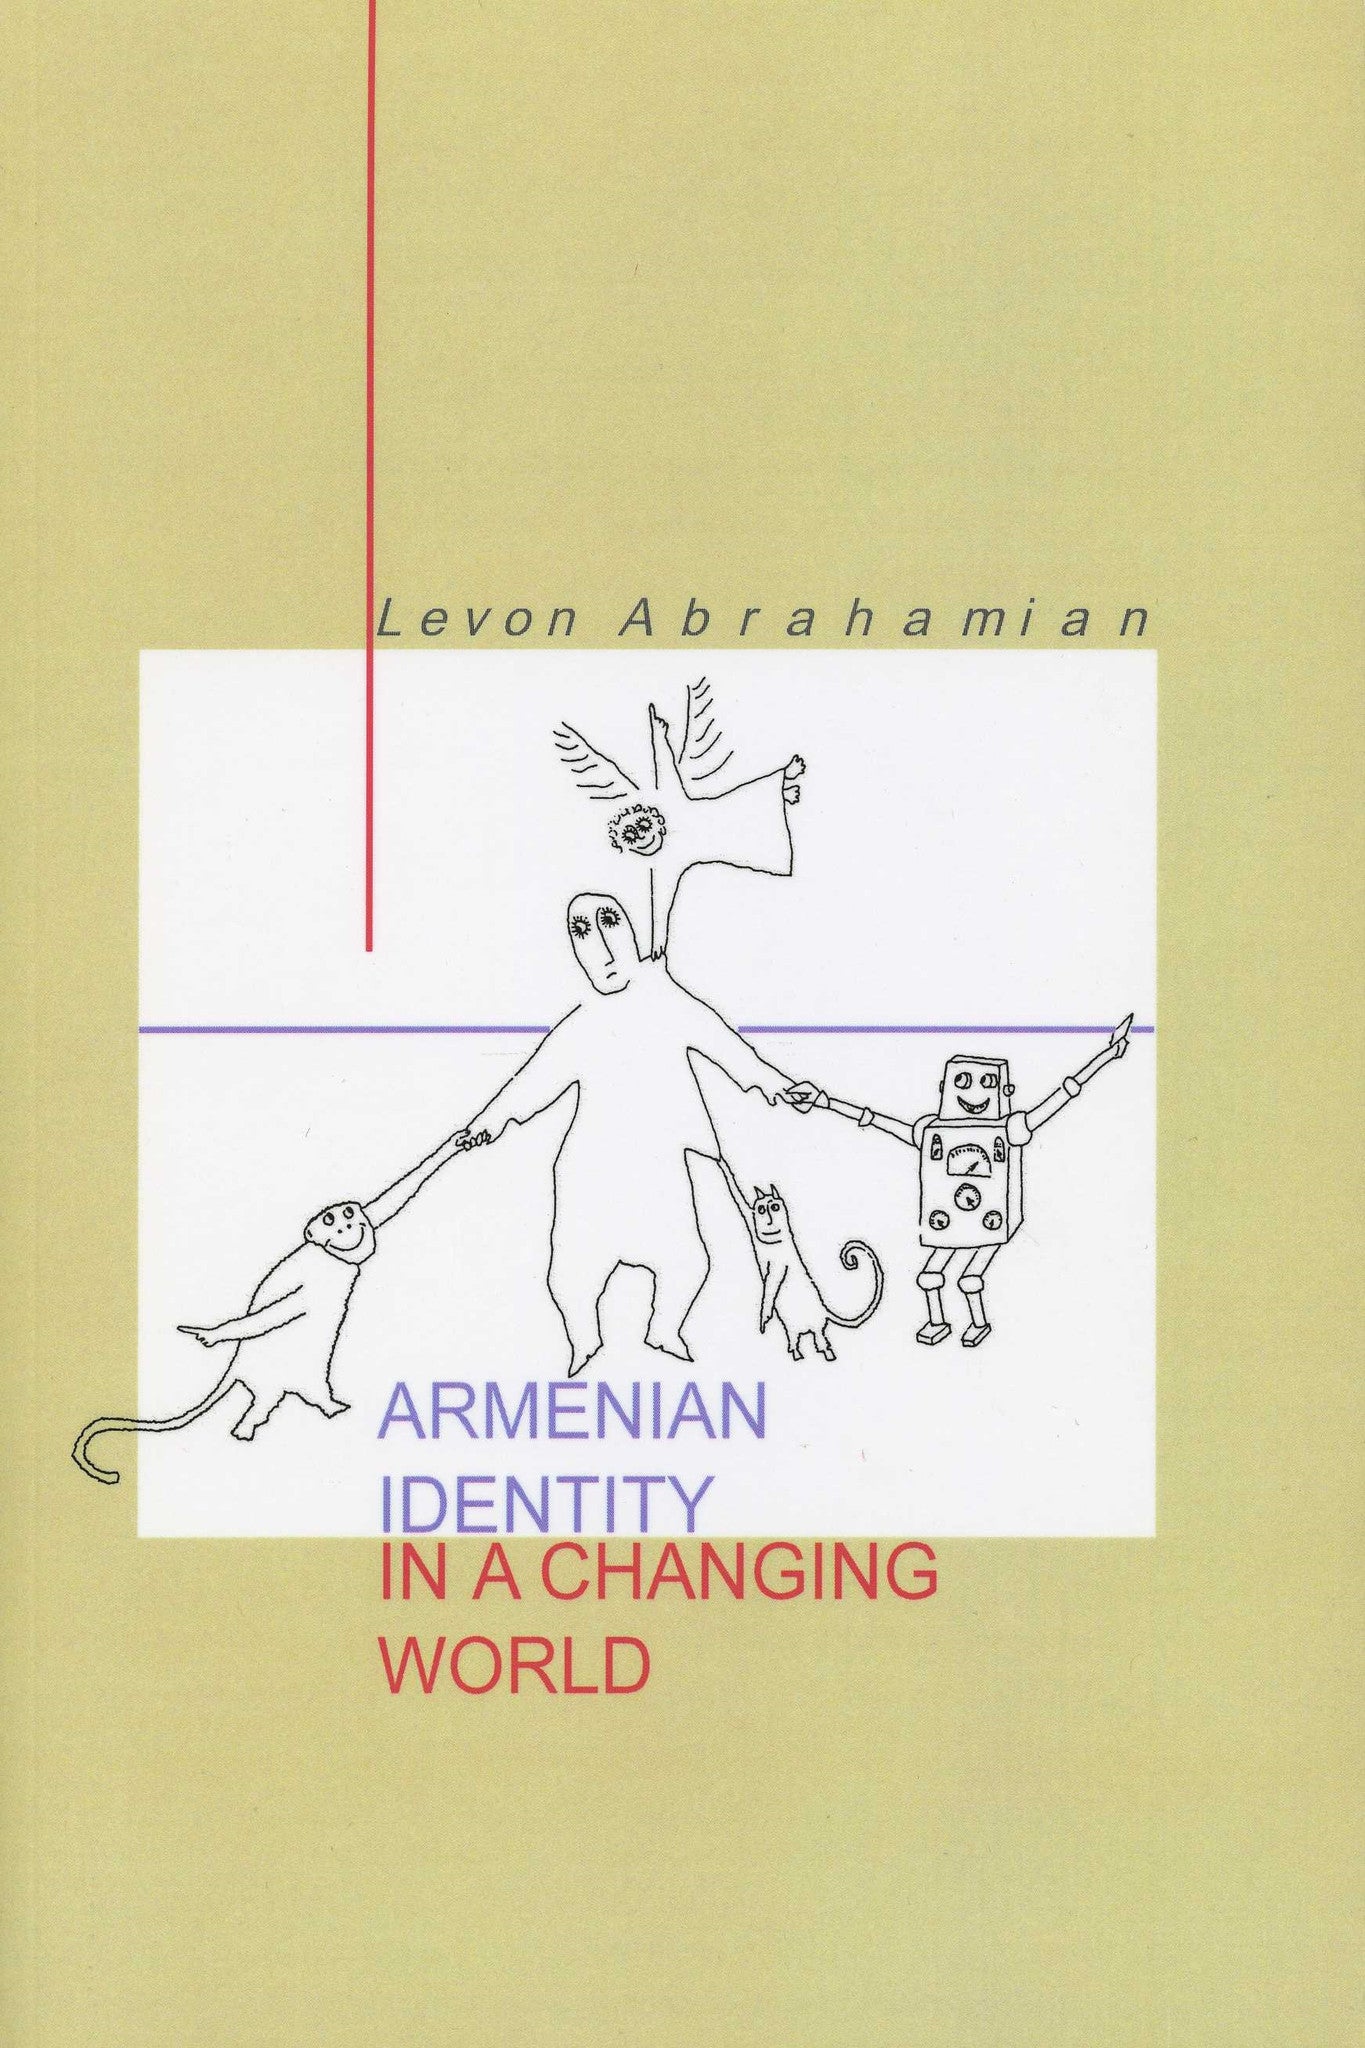 ARMENIAN IDENTITY IN A CHANGING WORLD